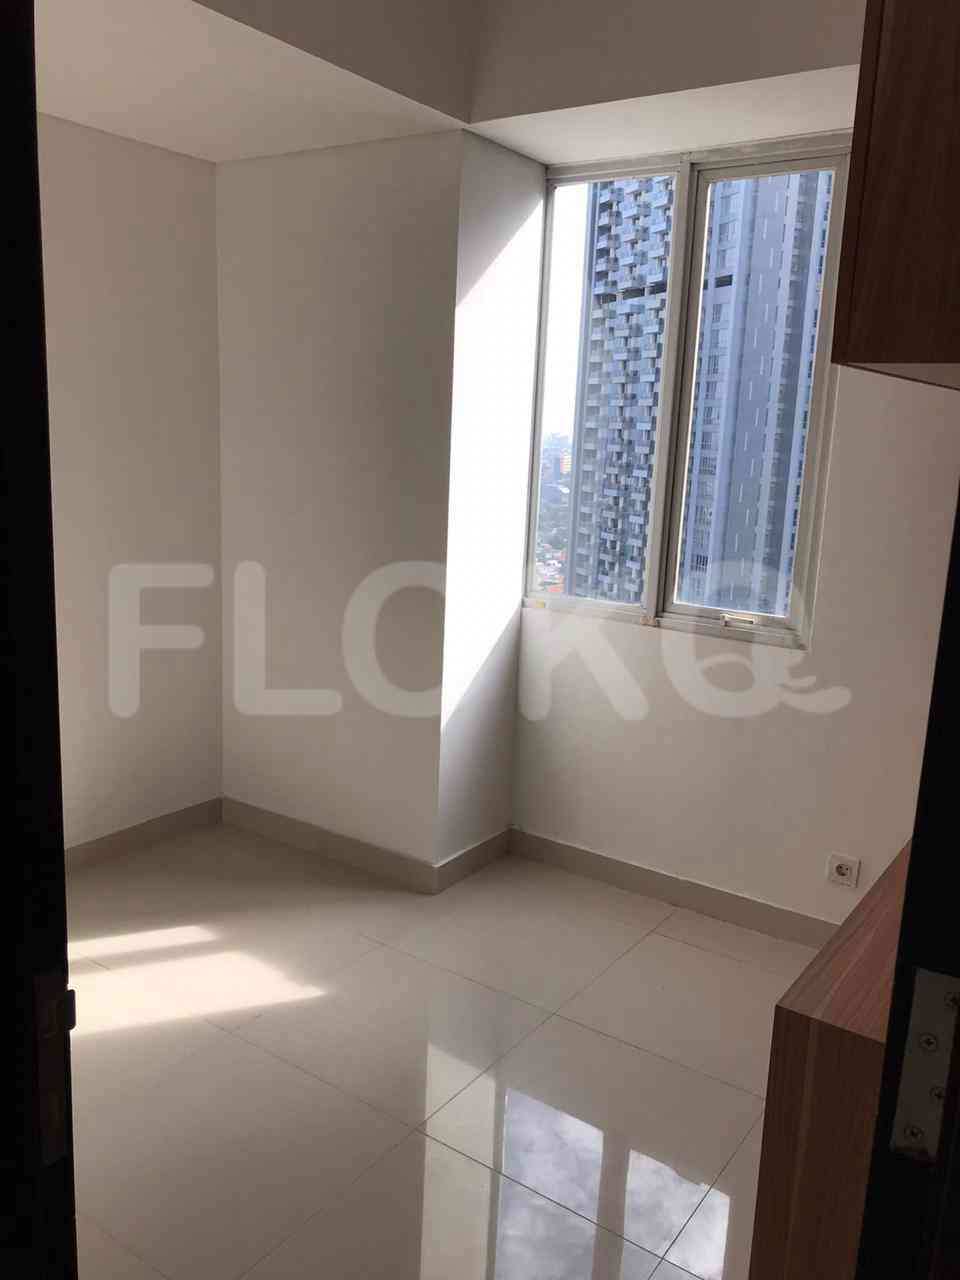 2 Bedroom on 15th Floor for Rent in Westmark Apartment - fta608 1